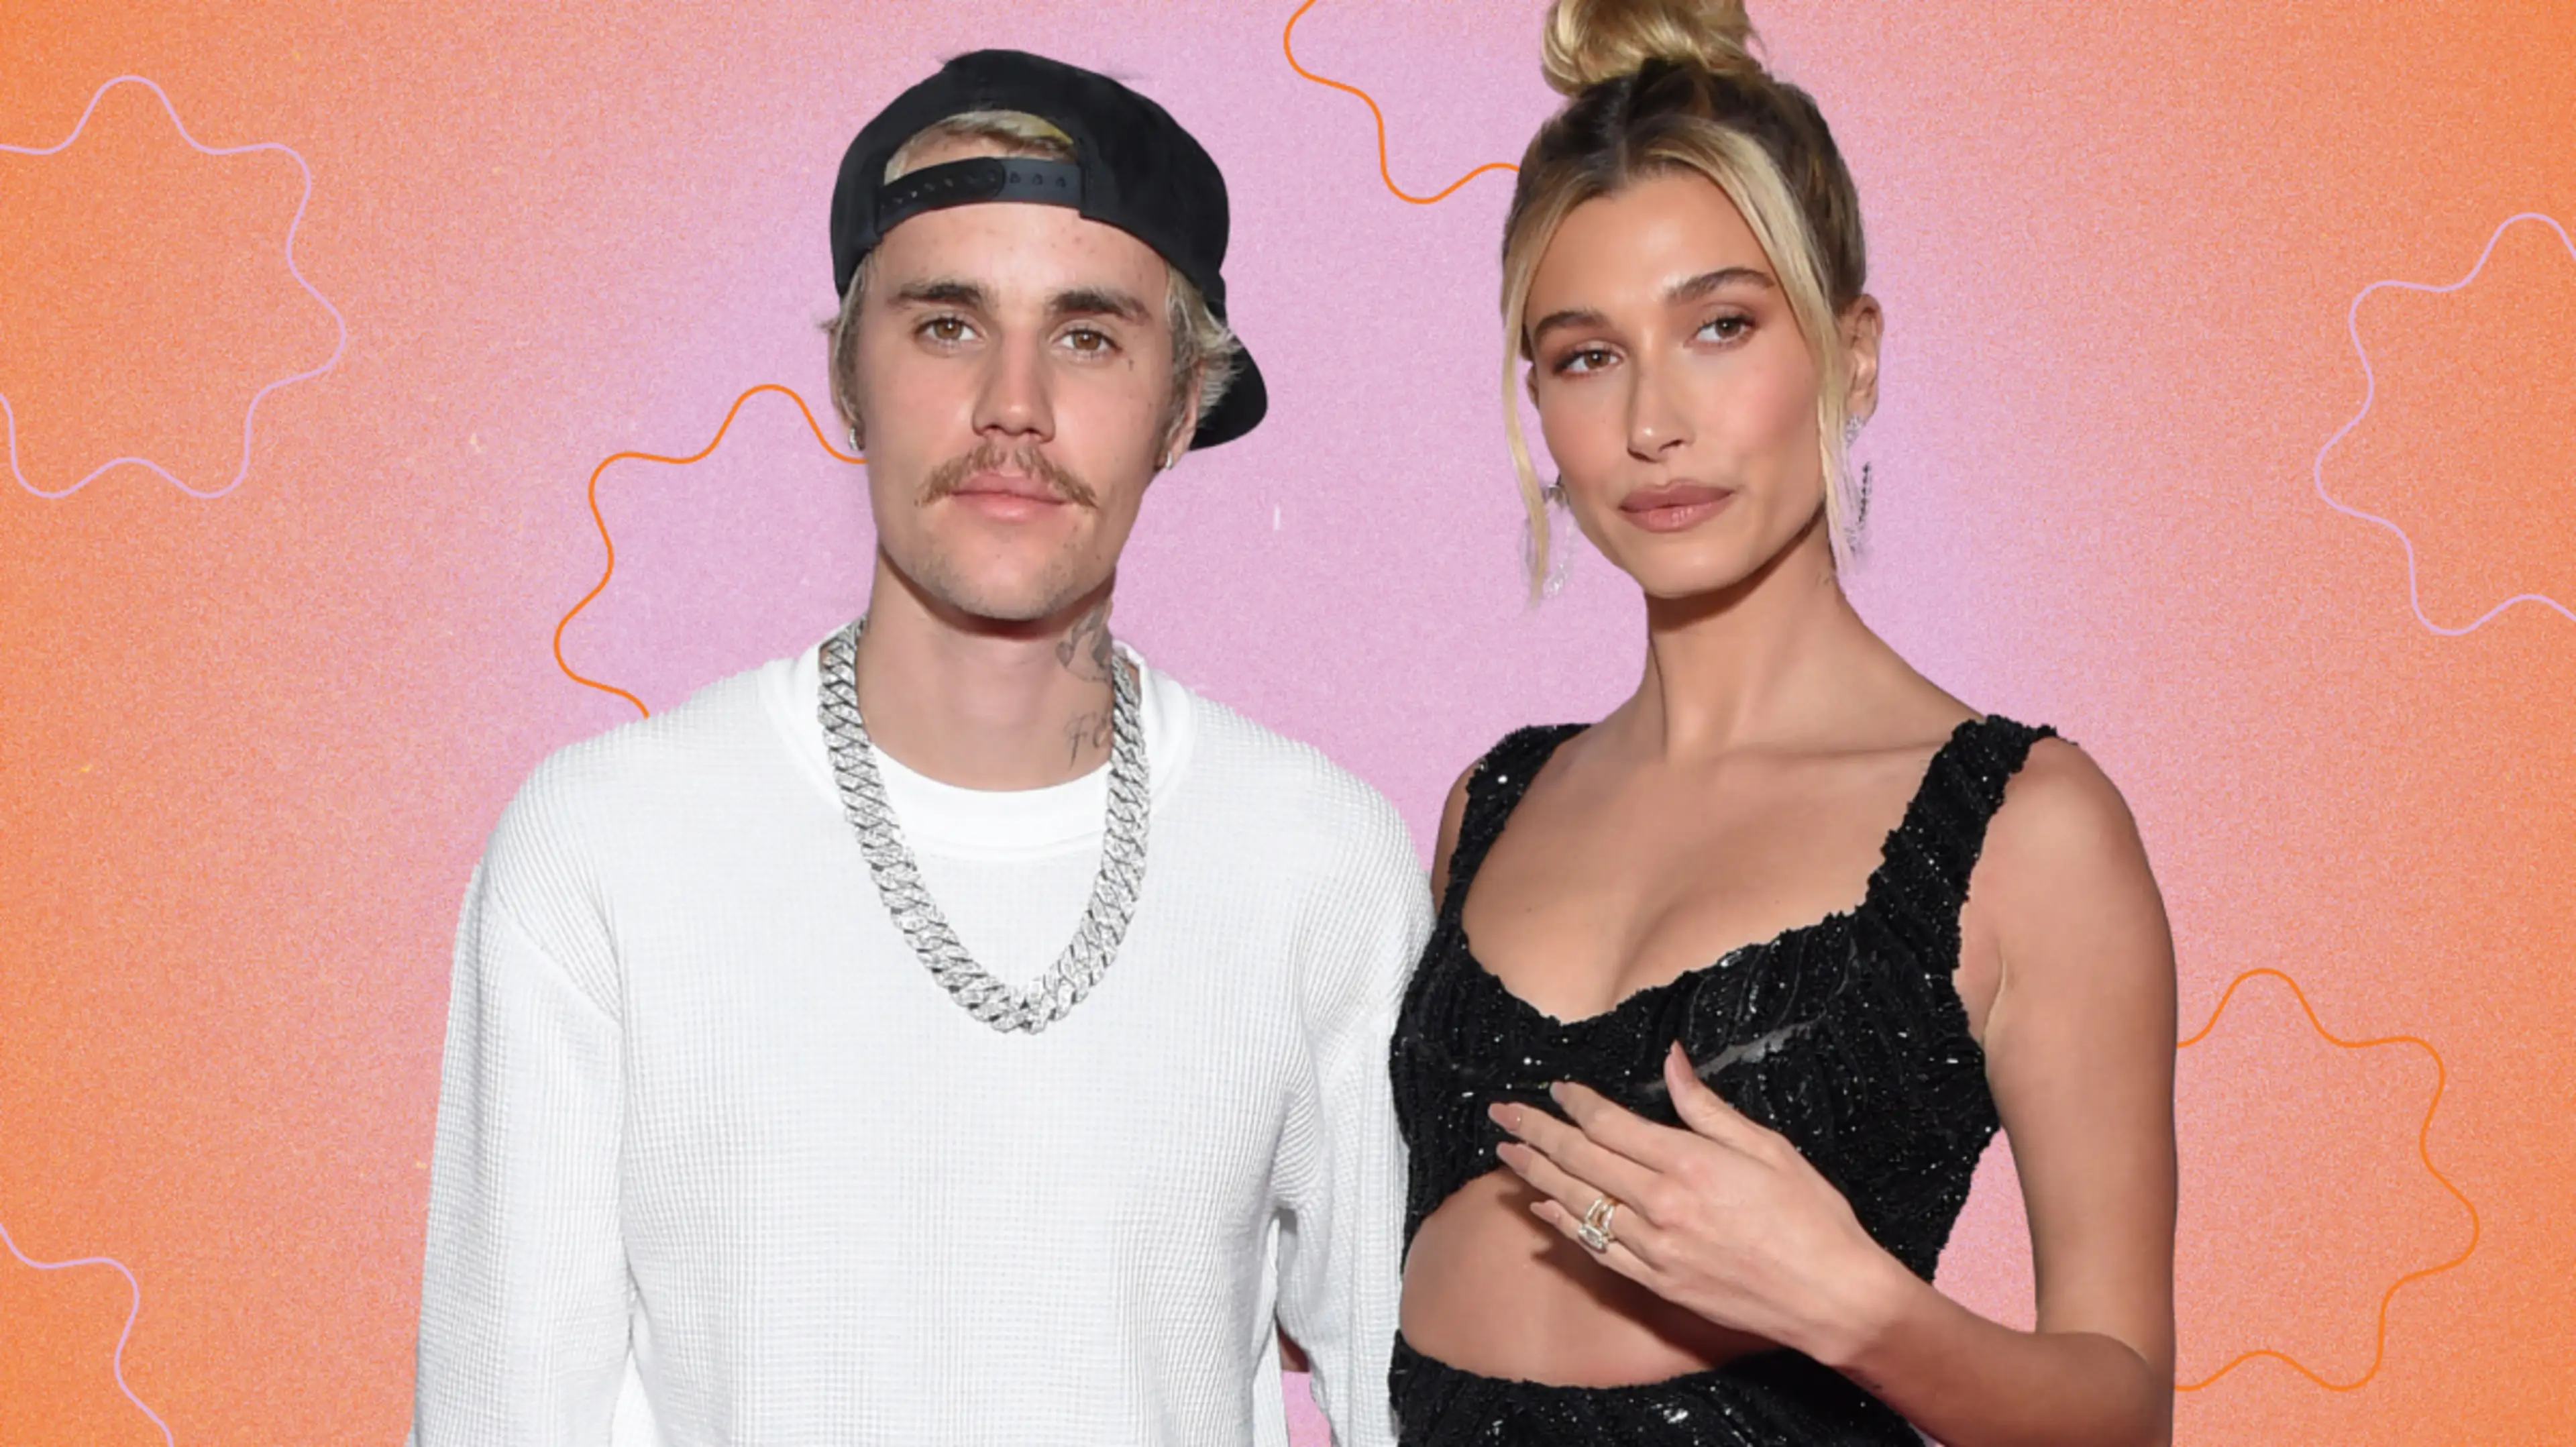 Congratulations to the Biebers—Now Let’s Leave Them Alone!